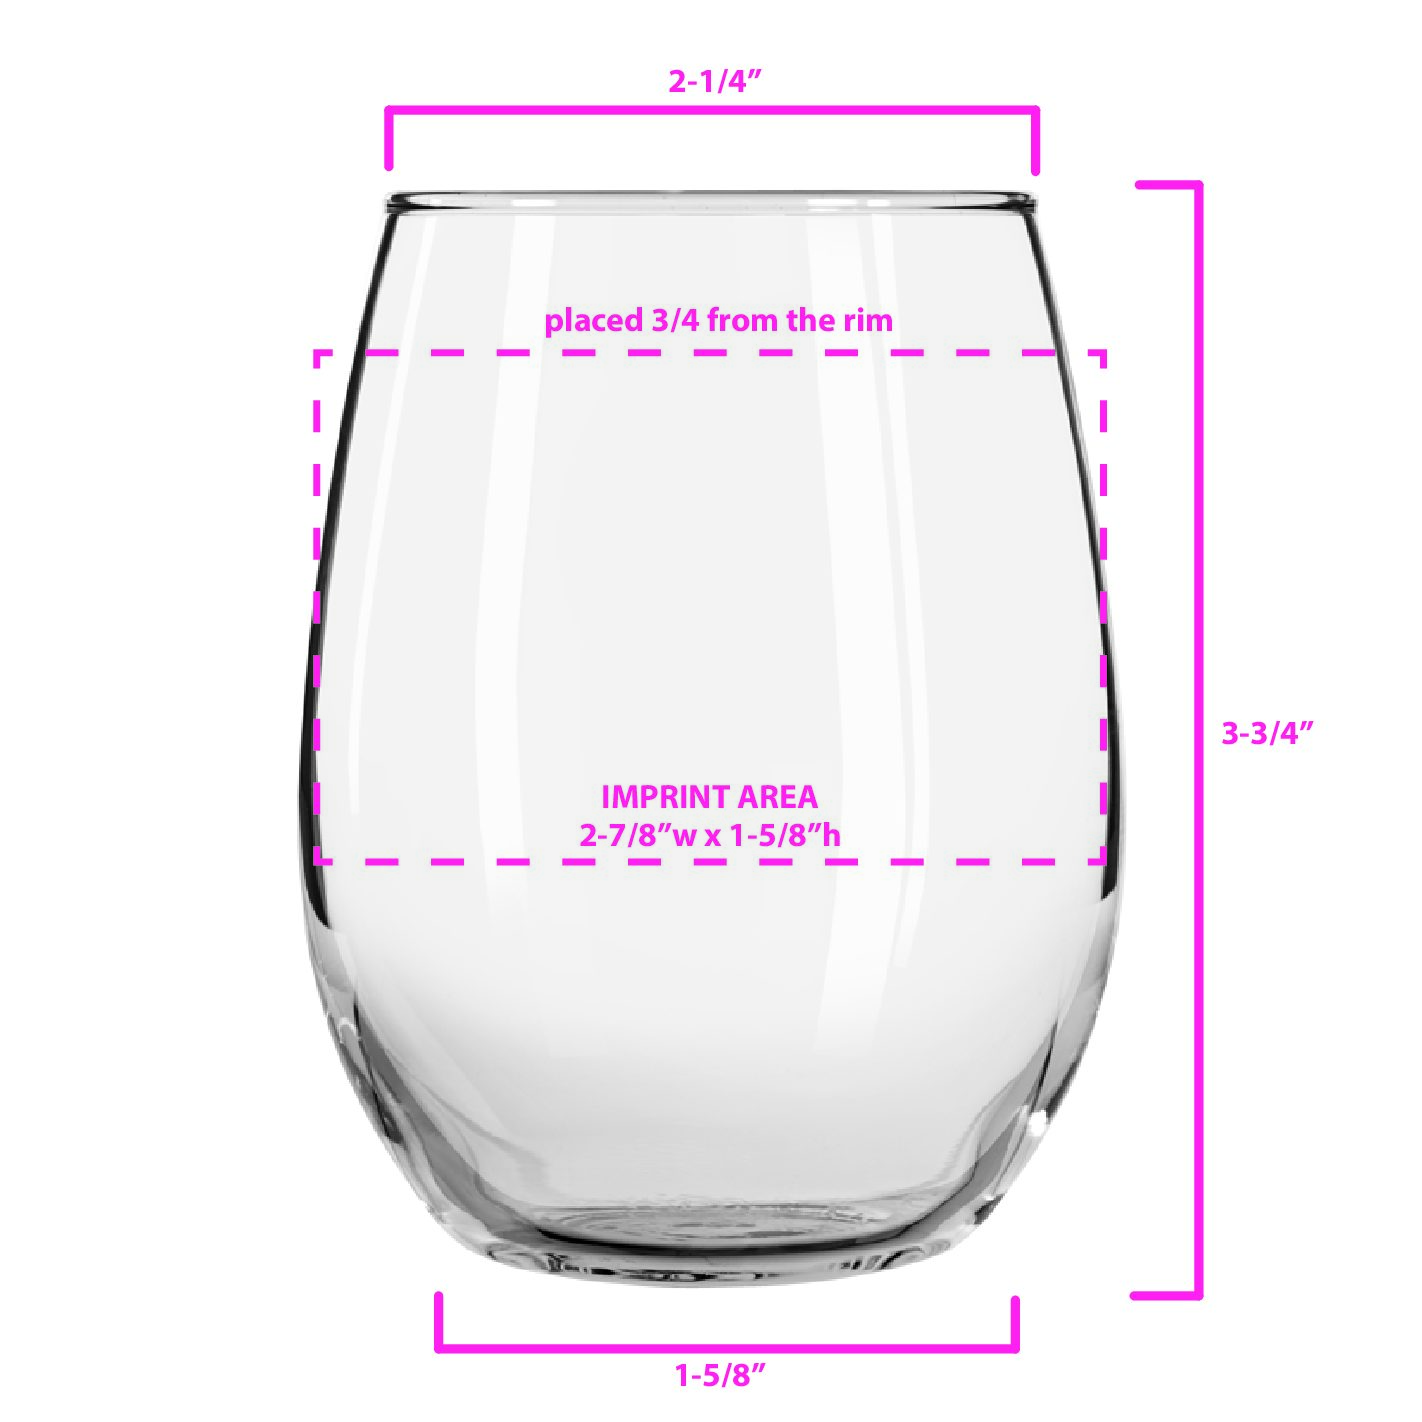 Personalized 9 oz. ARC Stemless Etched Wine Glasses